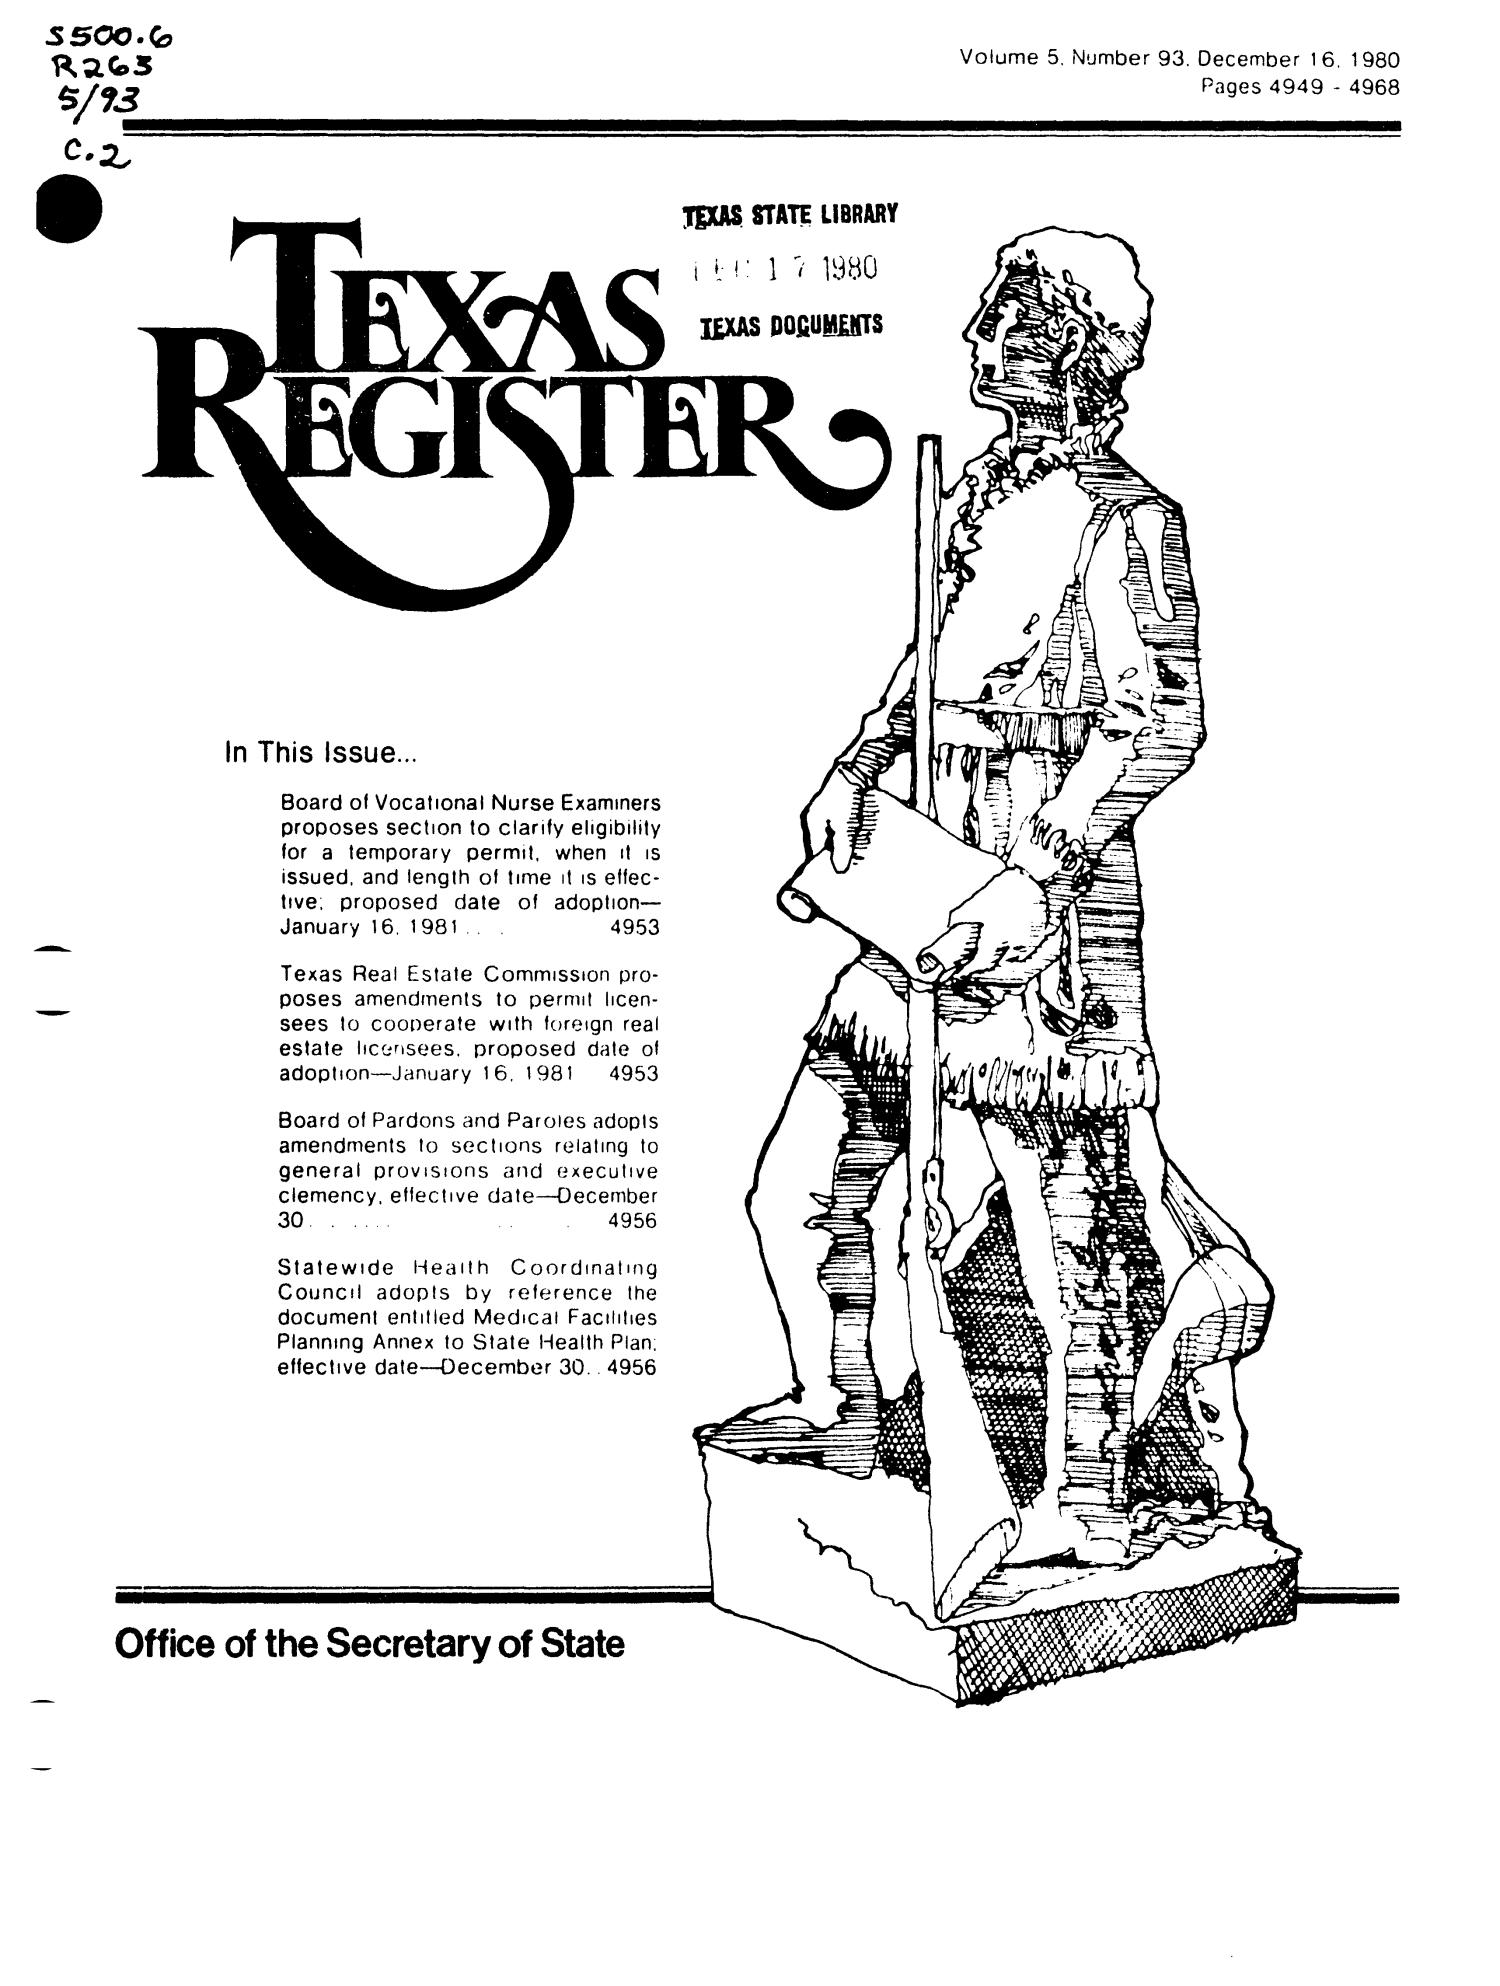 Texas Register, Volume 5, Number 93, Pages 4949-4968, December 16, 1980
                                                
                                                    Title Page
                                                